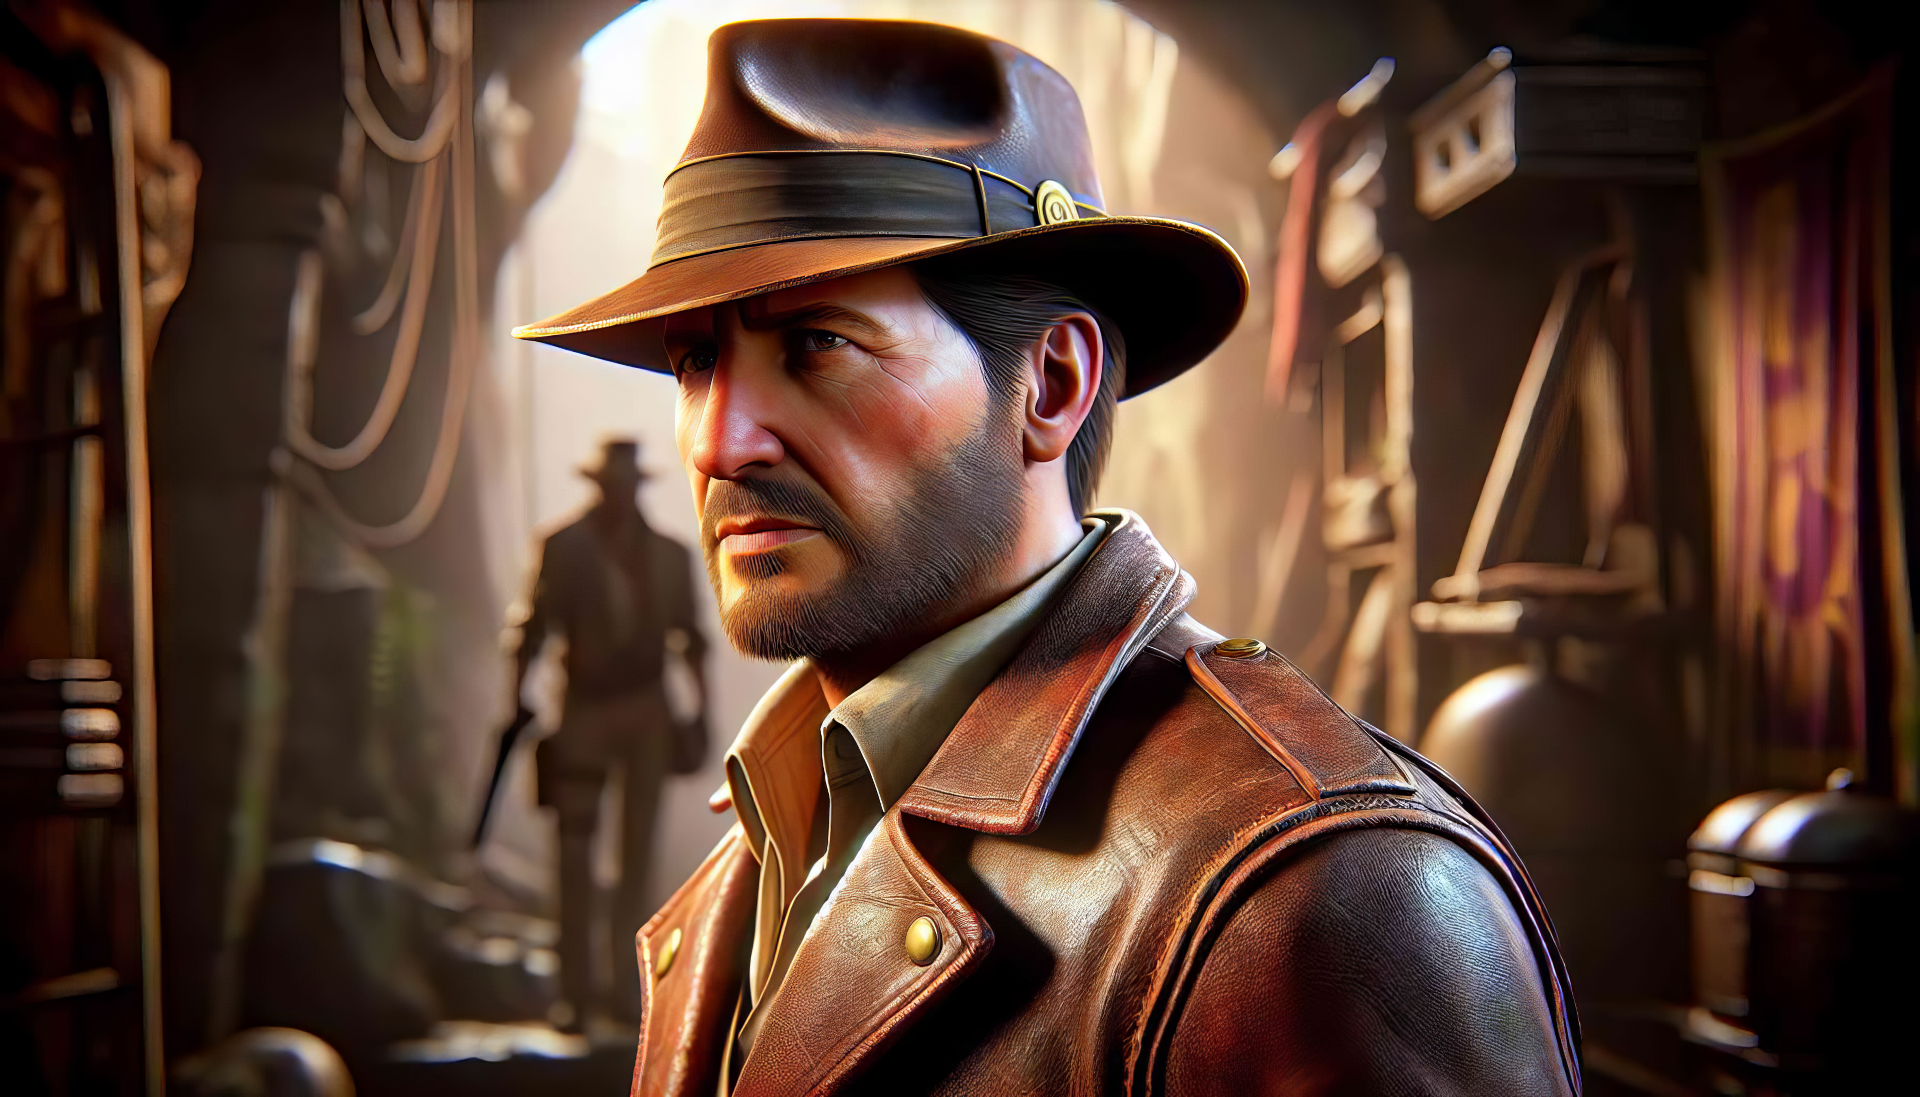 Indiana Jones and the Great Circle may also be coming to PlayStation 5 - rumours